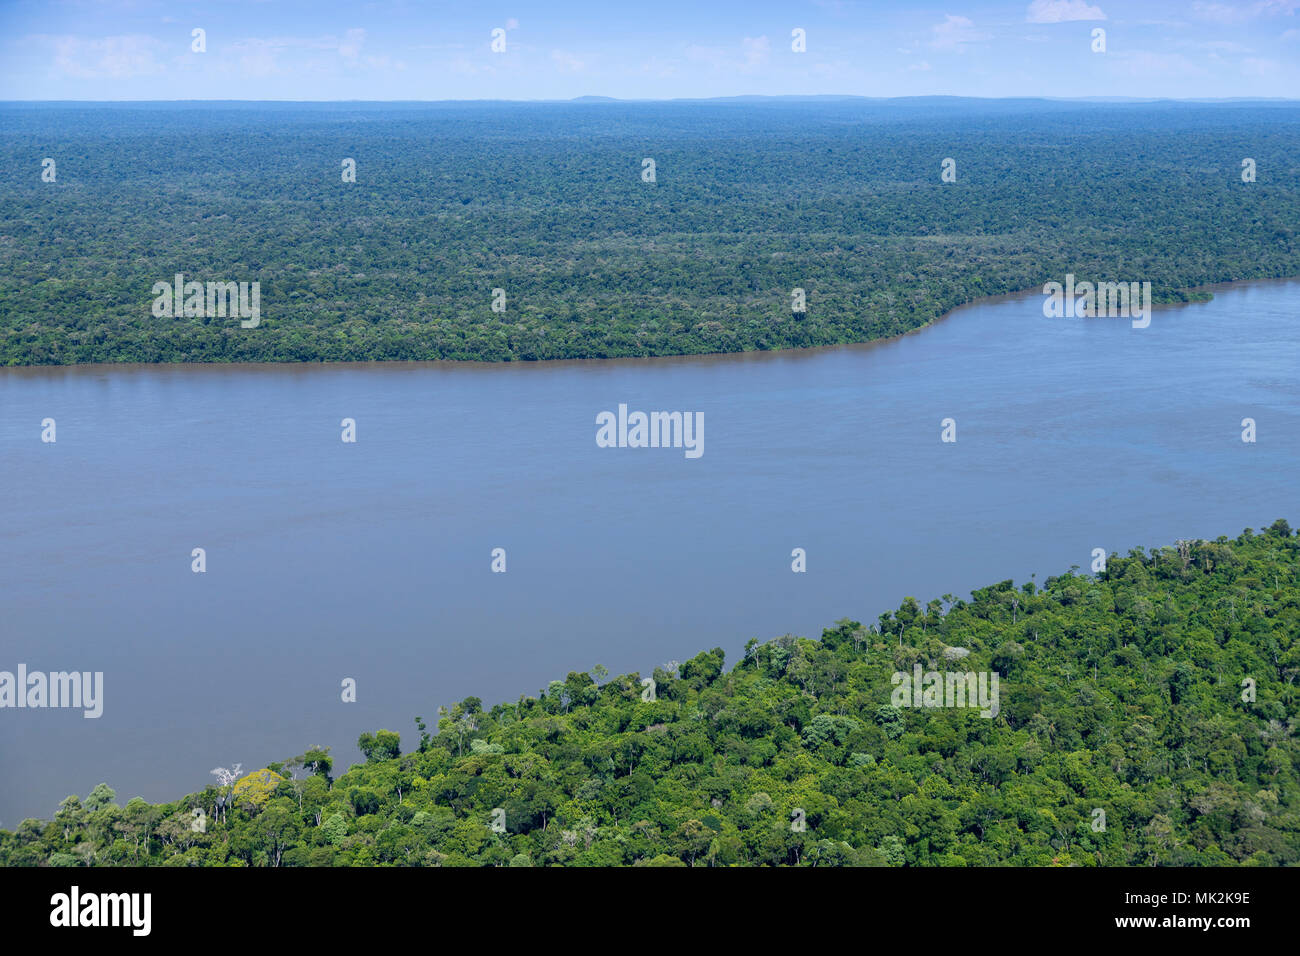 The joint Iguacu and Iguazu national parks and the Iguacu river on the Brazilian and Argentinean border Stock Photo